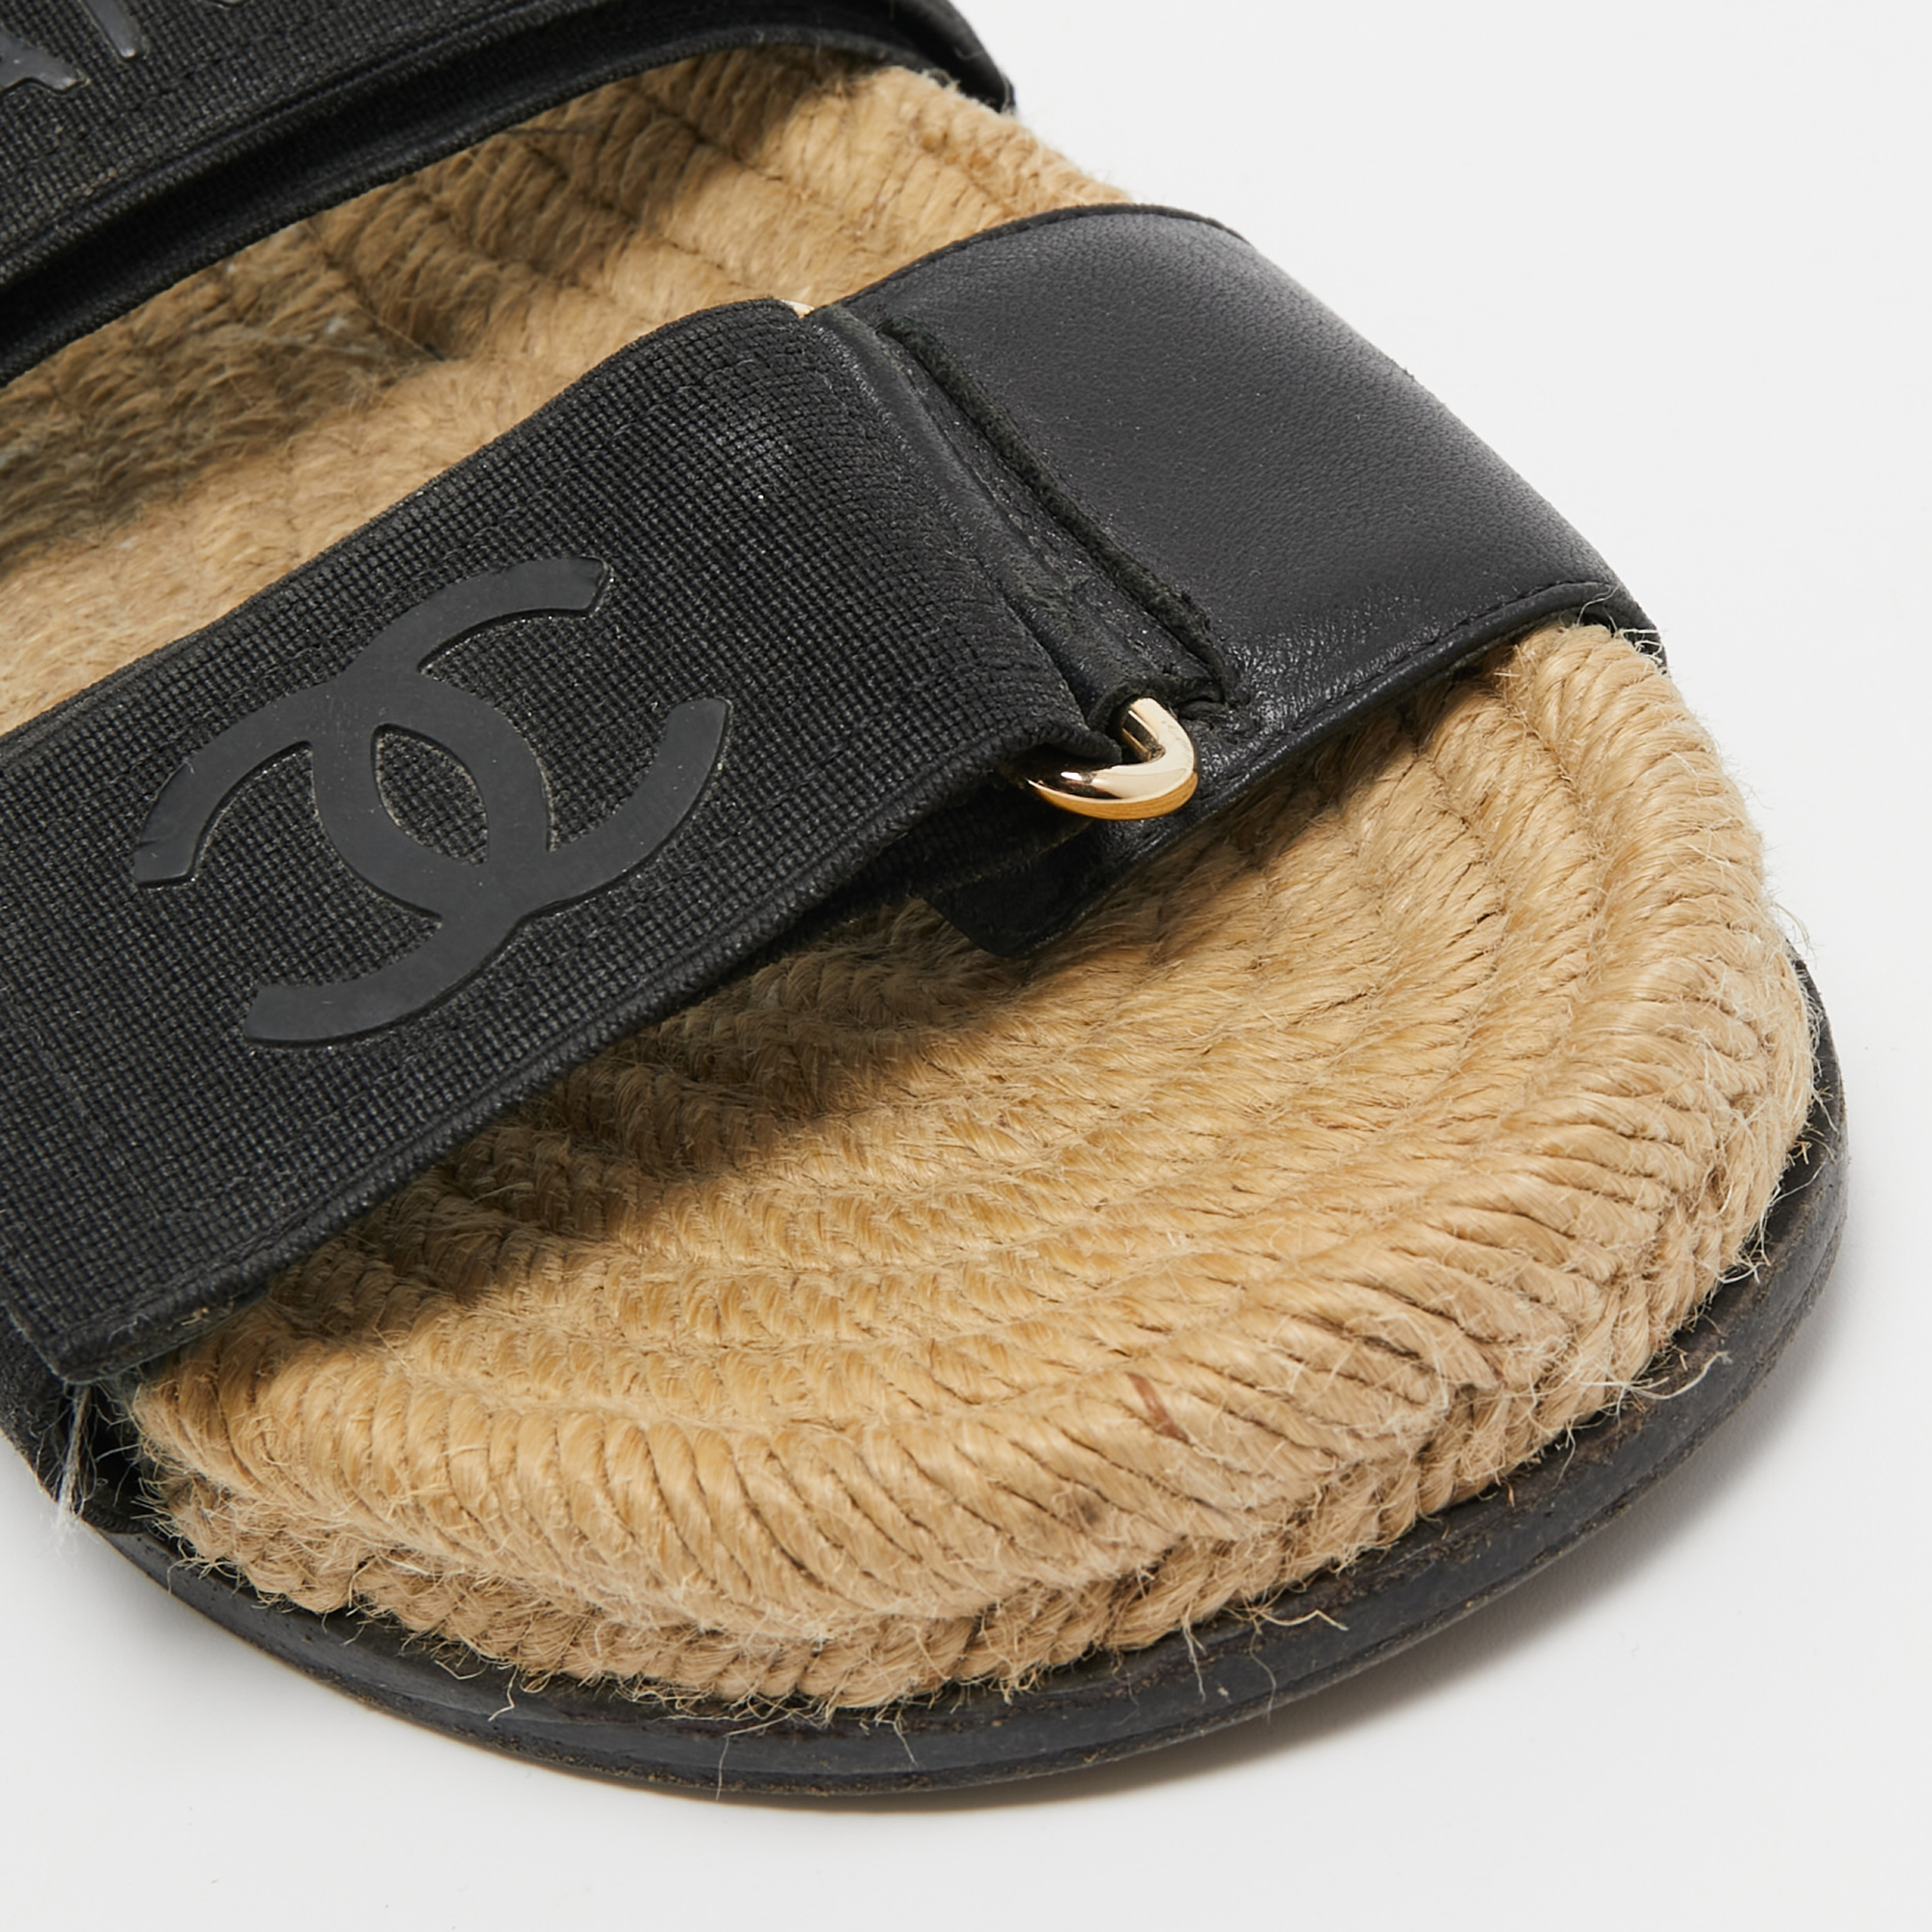 Chanel Black Leather And Canvas CC Velcro Espadrille Flat Sandals Size 37